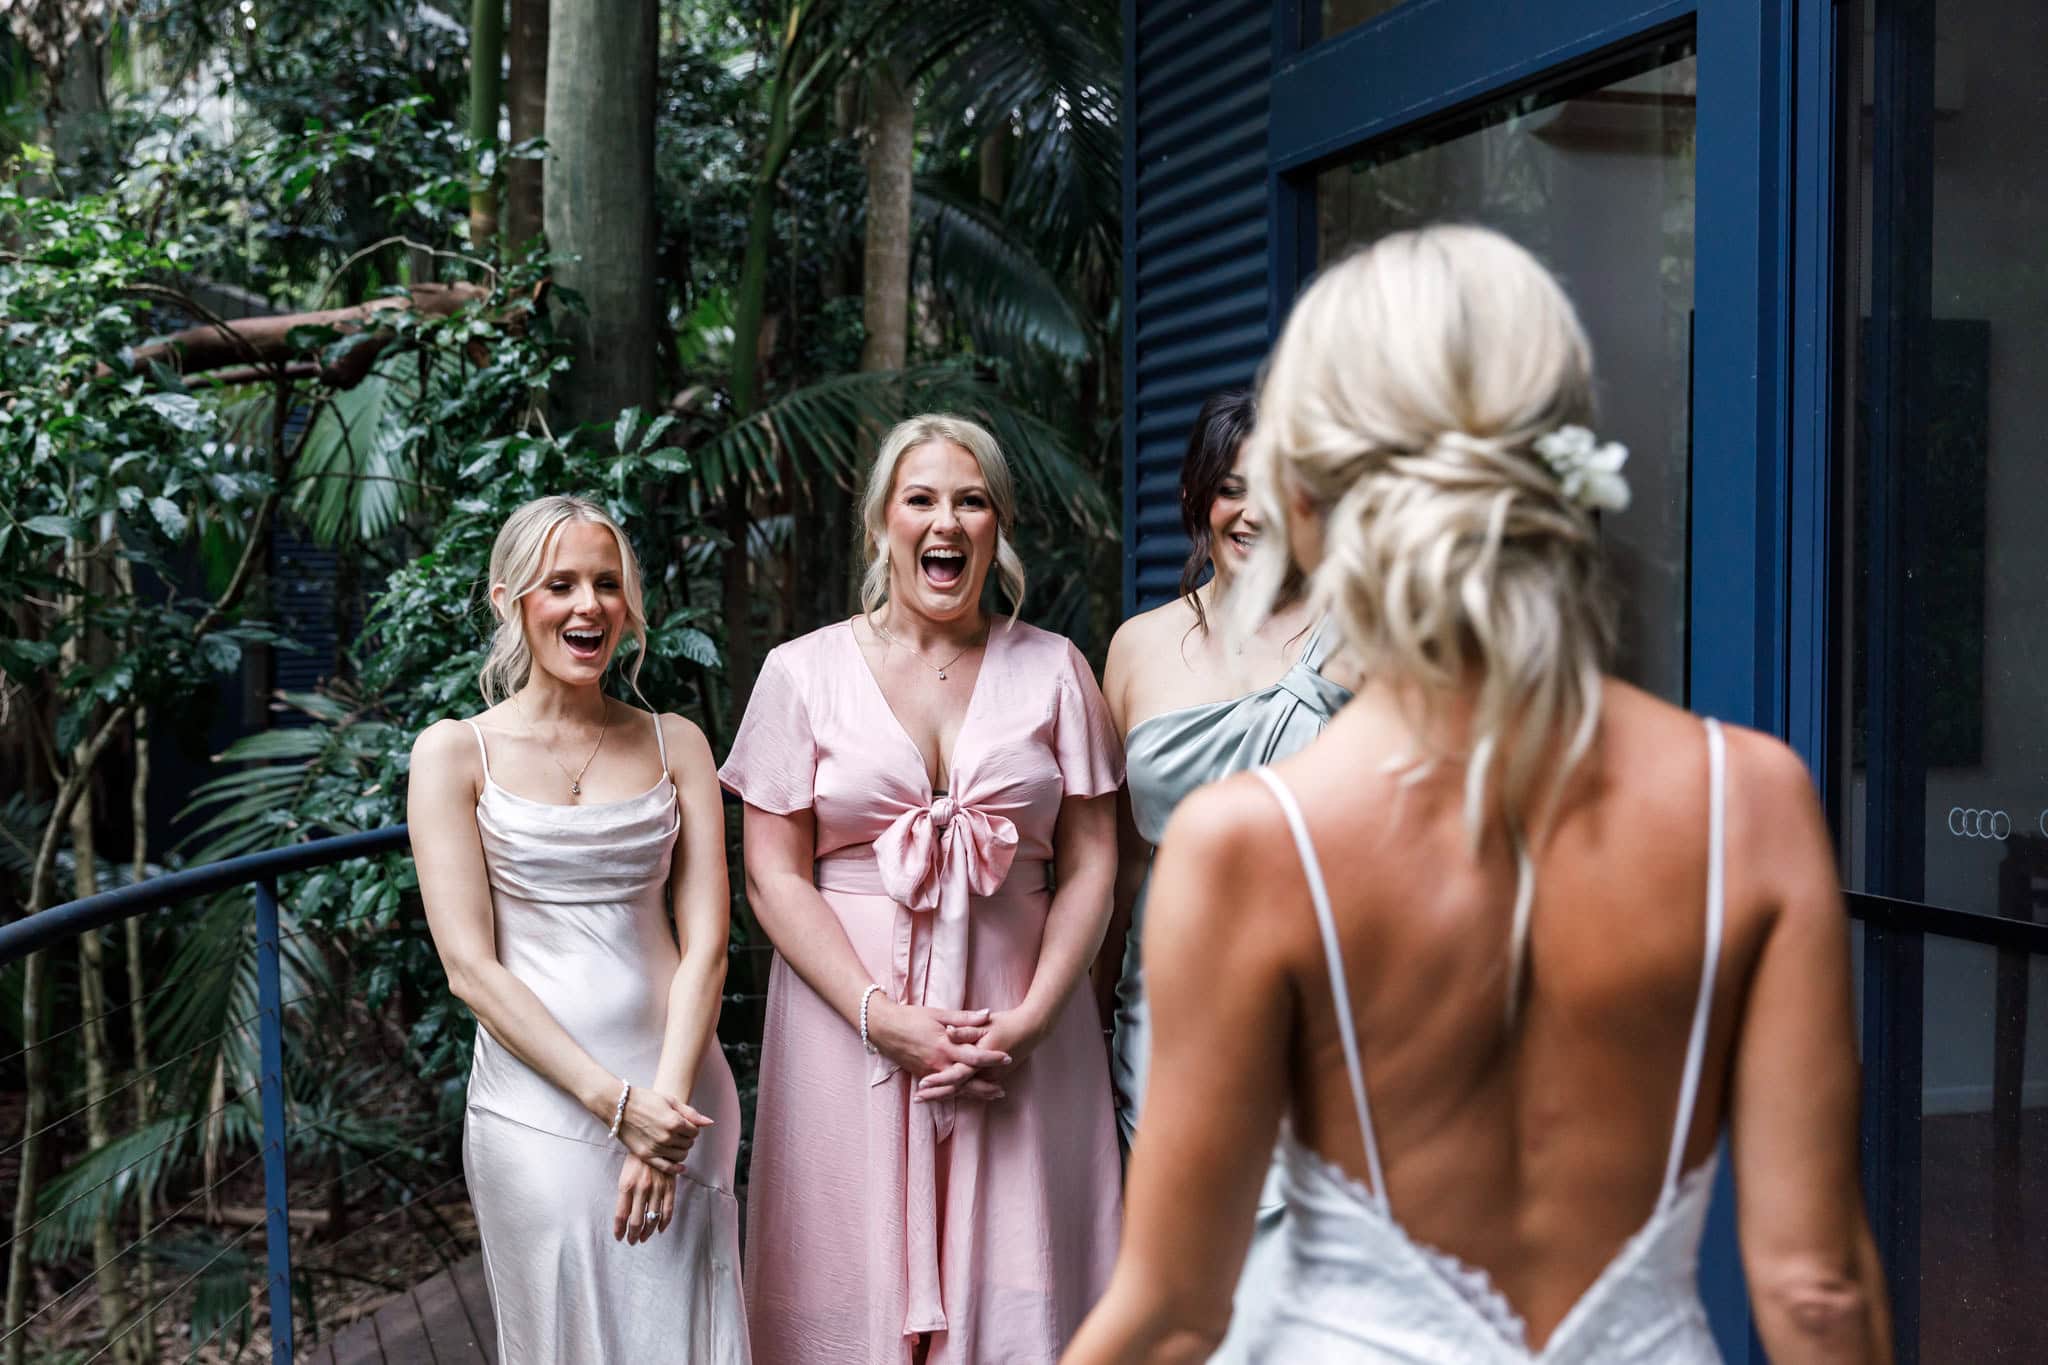 Dress reveal to bridal party on wedding day.